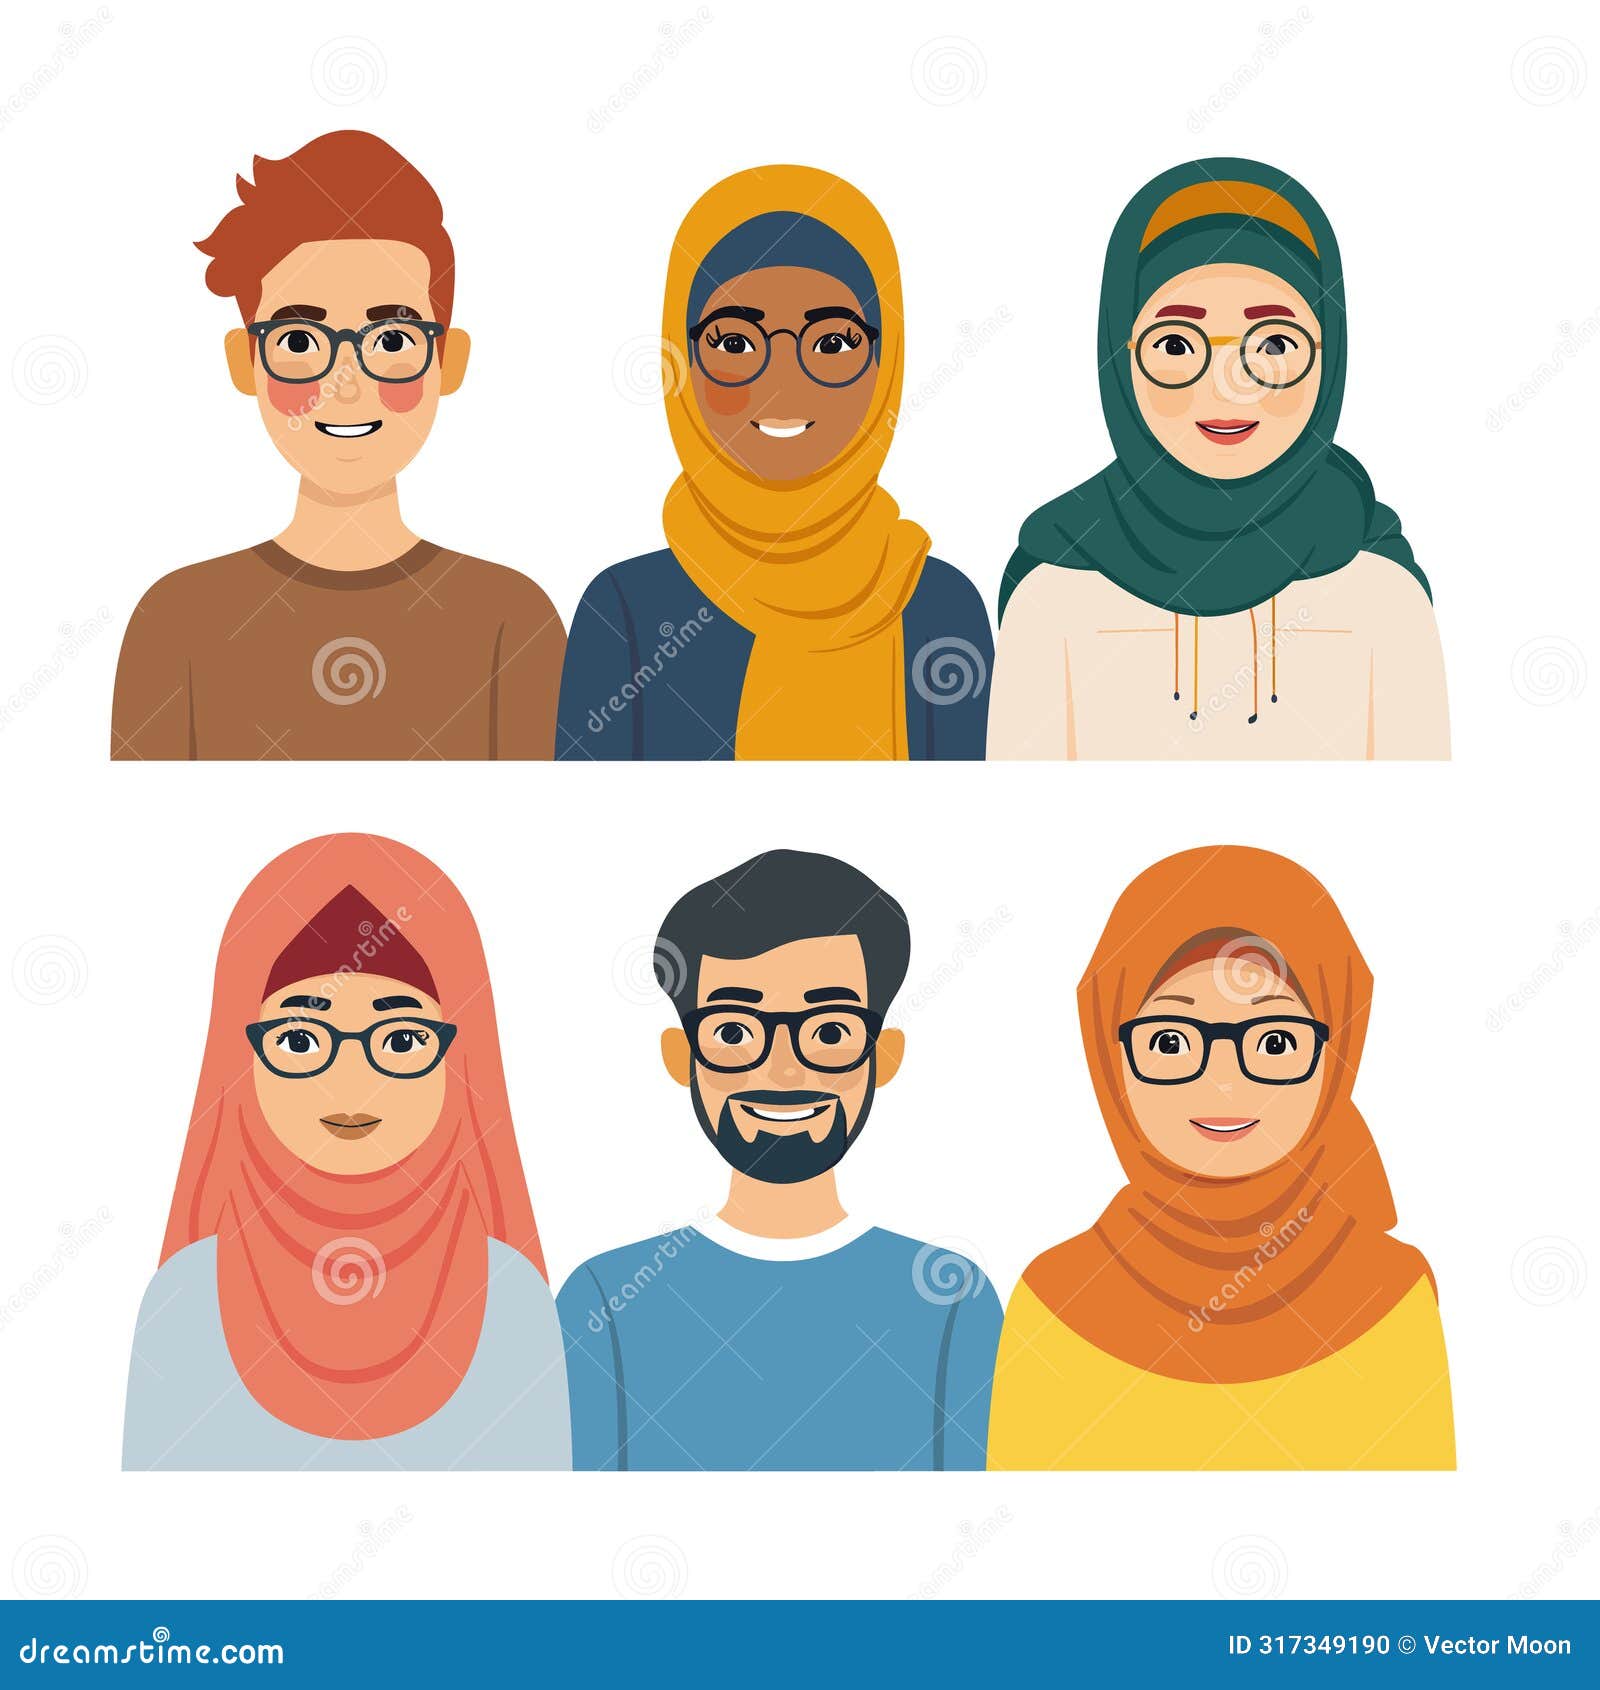 young adults smiling, diverse ethnicities. muslim women wearing hijabs, man glasses. cheerful